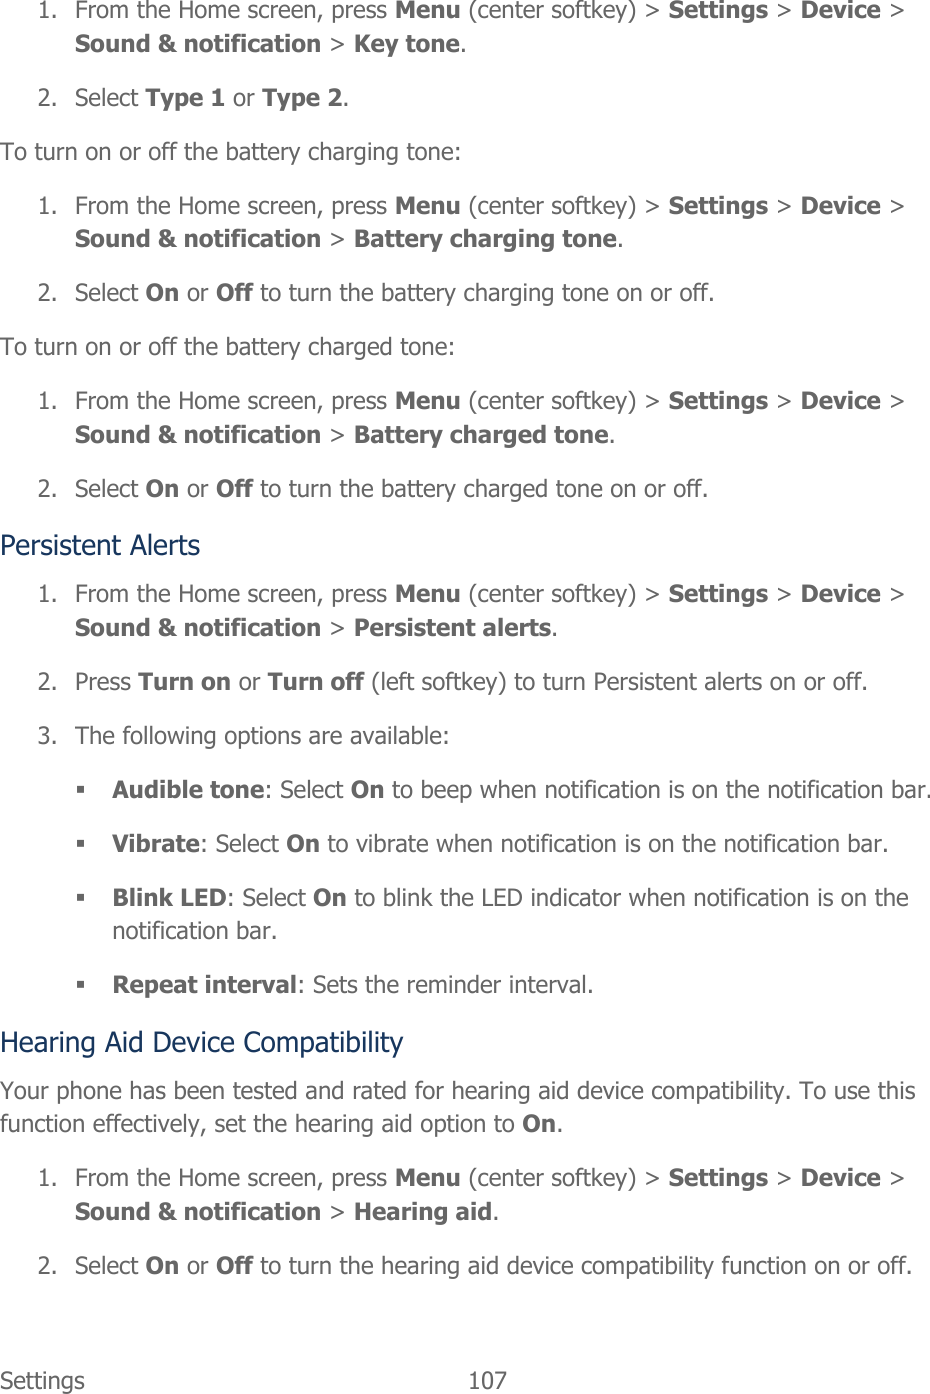  Settings  107   1. From the Home screen, press Menu (center softkey) &gt; Settings &gt; Device &gt; Sound &amp; notification &gt; Key tone. 2. Select Type 1 or Type 2. To turn on or off the battery charging tone: 1. From the Home screen, press Menu (center softkey) &gt; Settings &gt; Device &gt; Sound &amp; notification &gt; Battery charging tone. 2. Select On or Off to turn the battery charging tone on or off. To turn on or off the battery charged tone: 1. From the Home screen, press Menu (center softkey) &gt; Settings &gt; Device &gt; Sound &amp; notification &gt; Battery charged tone. 2. Select On or Off to turn the battery charged tone on or off. Persistent Alerts 1. From the Home screen, press Menu (center softkey) &gt; Settings &gt; Device &gt; Sound &amp; notification &gt; Persistent alerts. 2. Press Turn on or Turn off (left softkey) to turn Persistent alerts on or off. 3. The following options are available:  Audible tone: Select On to beep when notification is on the notification bar.  Vibrate: Select On to vibrate when notification is on the notification bar.  Blink LED: Select On to blink the LED indicator when notification is on the notification bar.  Repeat interval: Sets the reminder interval. Hearing Aid Device Compatibility Your phone has been tested and rated for hearing aid device compatibility. To use this function effectively, set the hearing aid option to On. 1. From the Home screen, press Menu (center softkey) &gt; Settings &gt; Device &gt; Sound &amp; notification &gt; Hearing aid. 2. Select On or Off to turn the hearing aid device compatibility function on or off. 